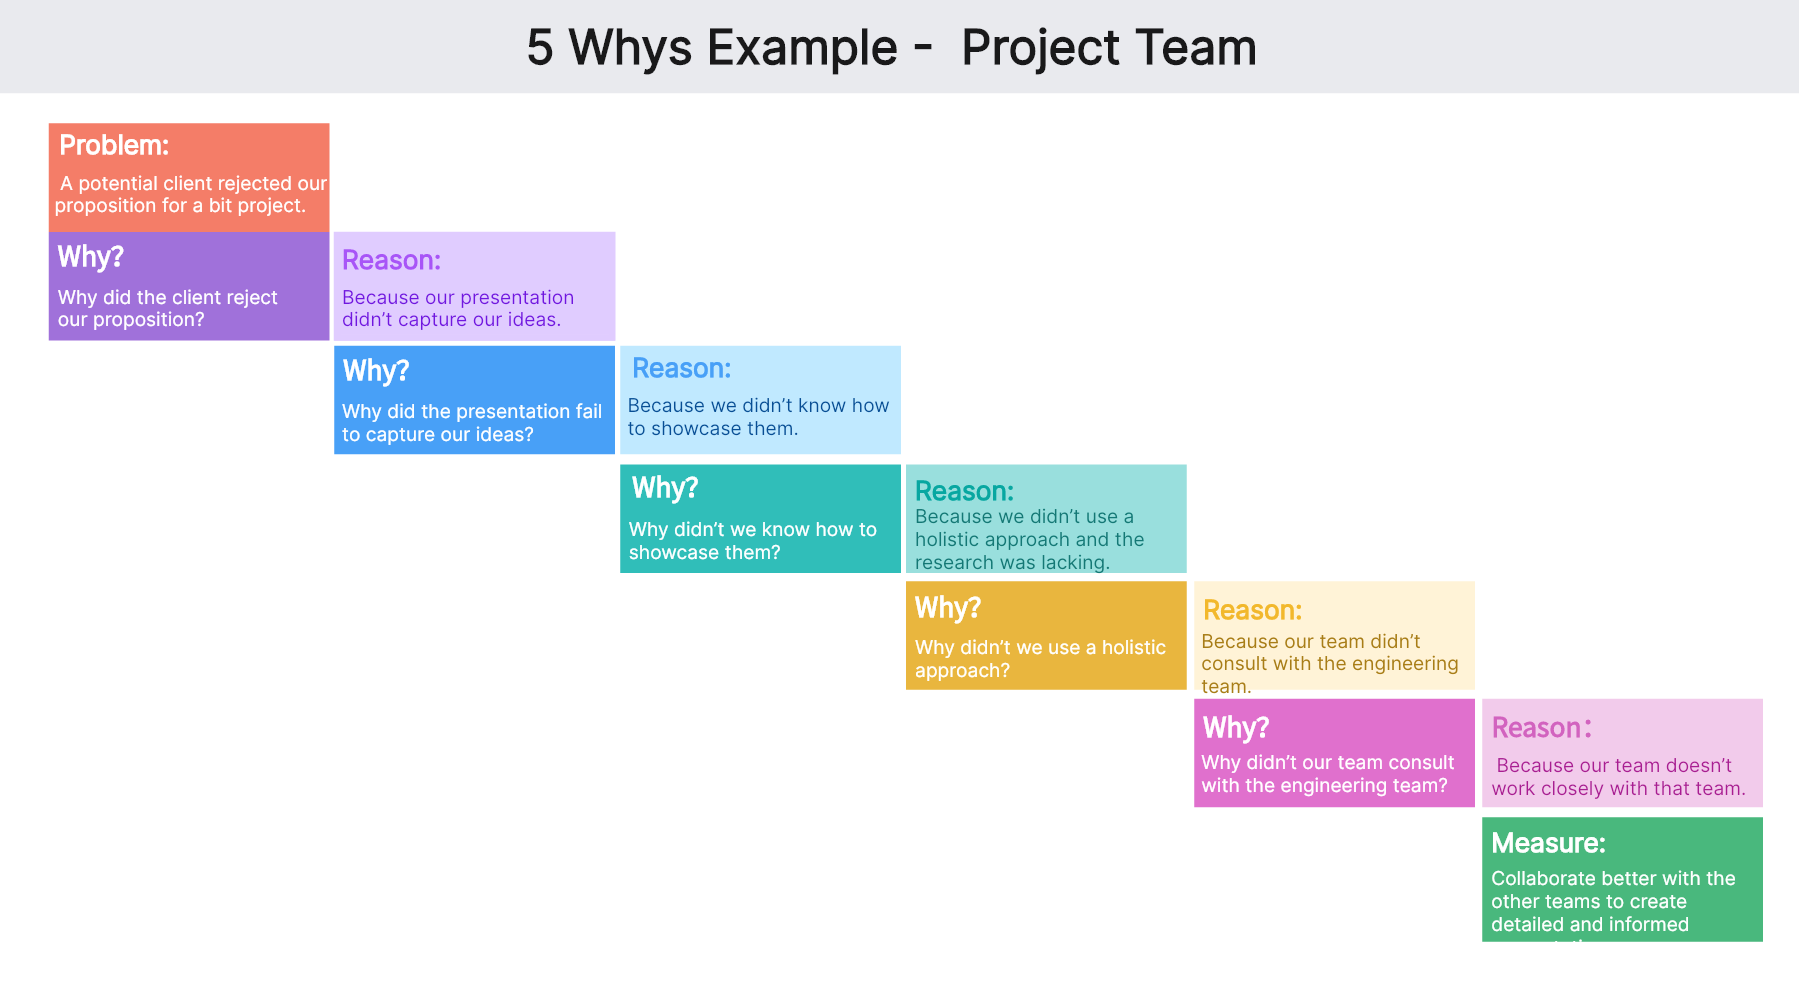 5 whys example project team